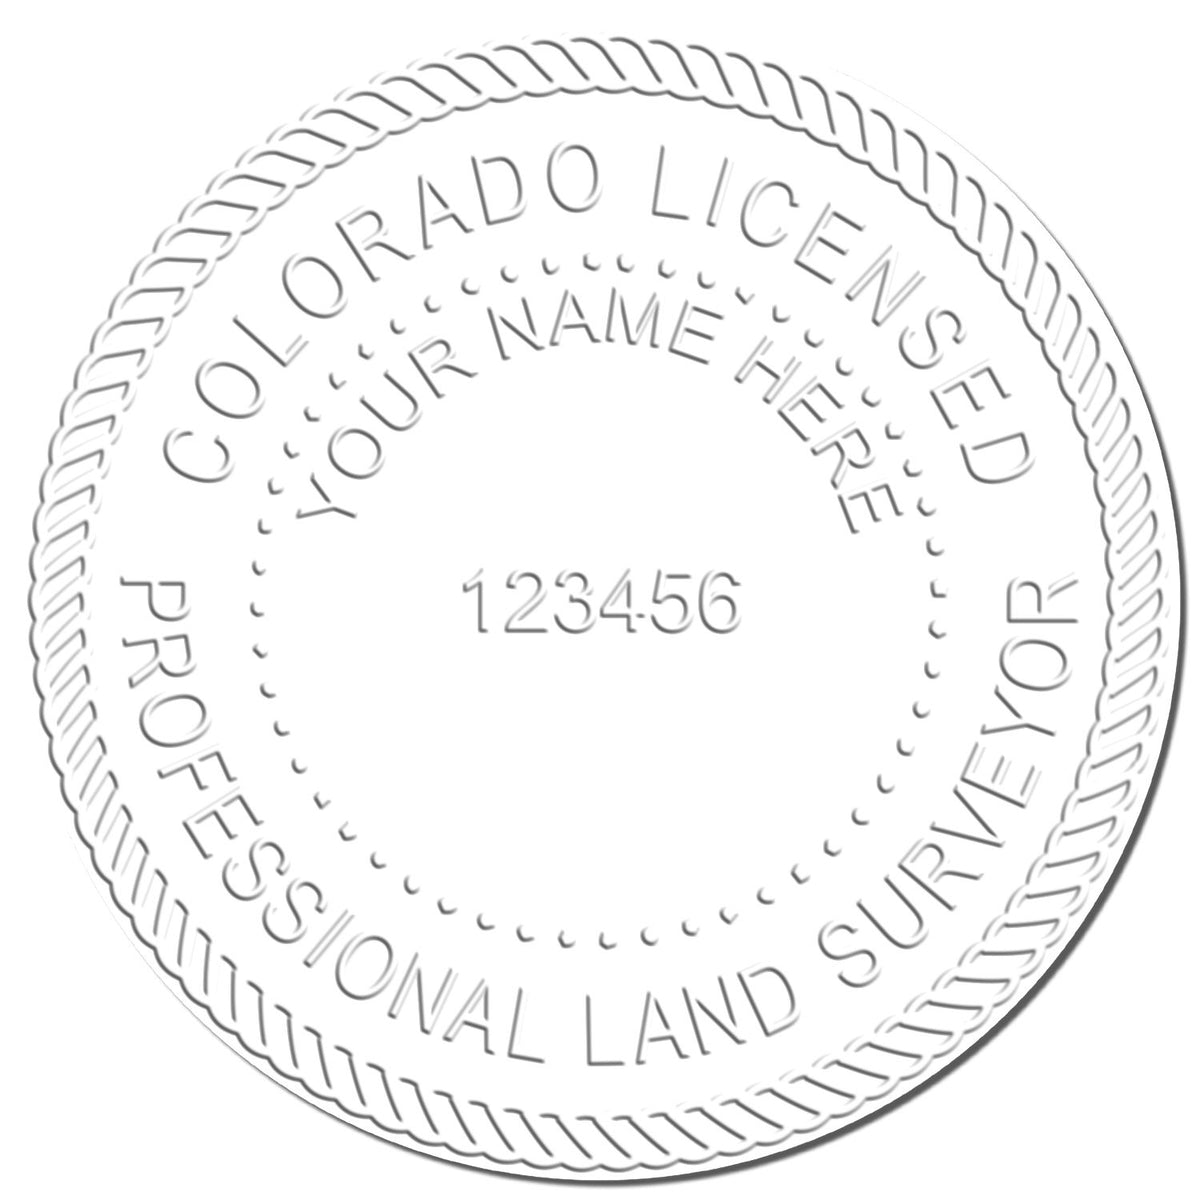 This paper is stamped with a sample imprint of the Heavy Duty Cast Iron Colorado Land Surveyor Seal Embosser, signifying its quality and reliability.